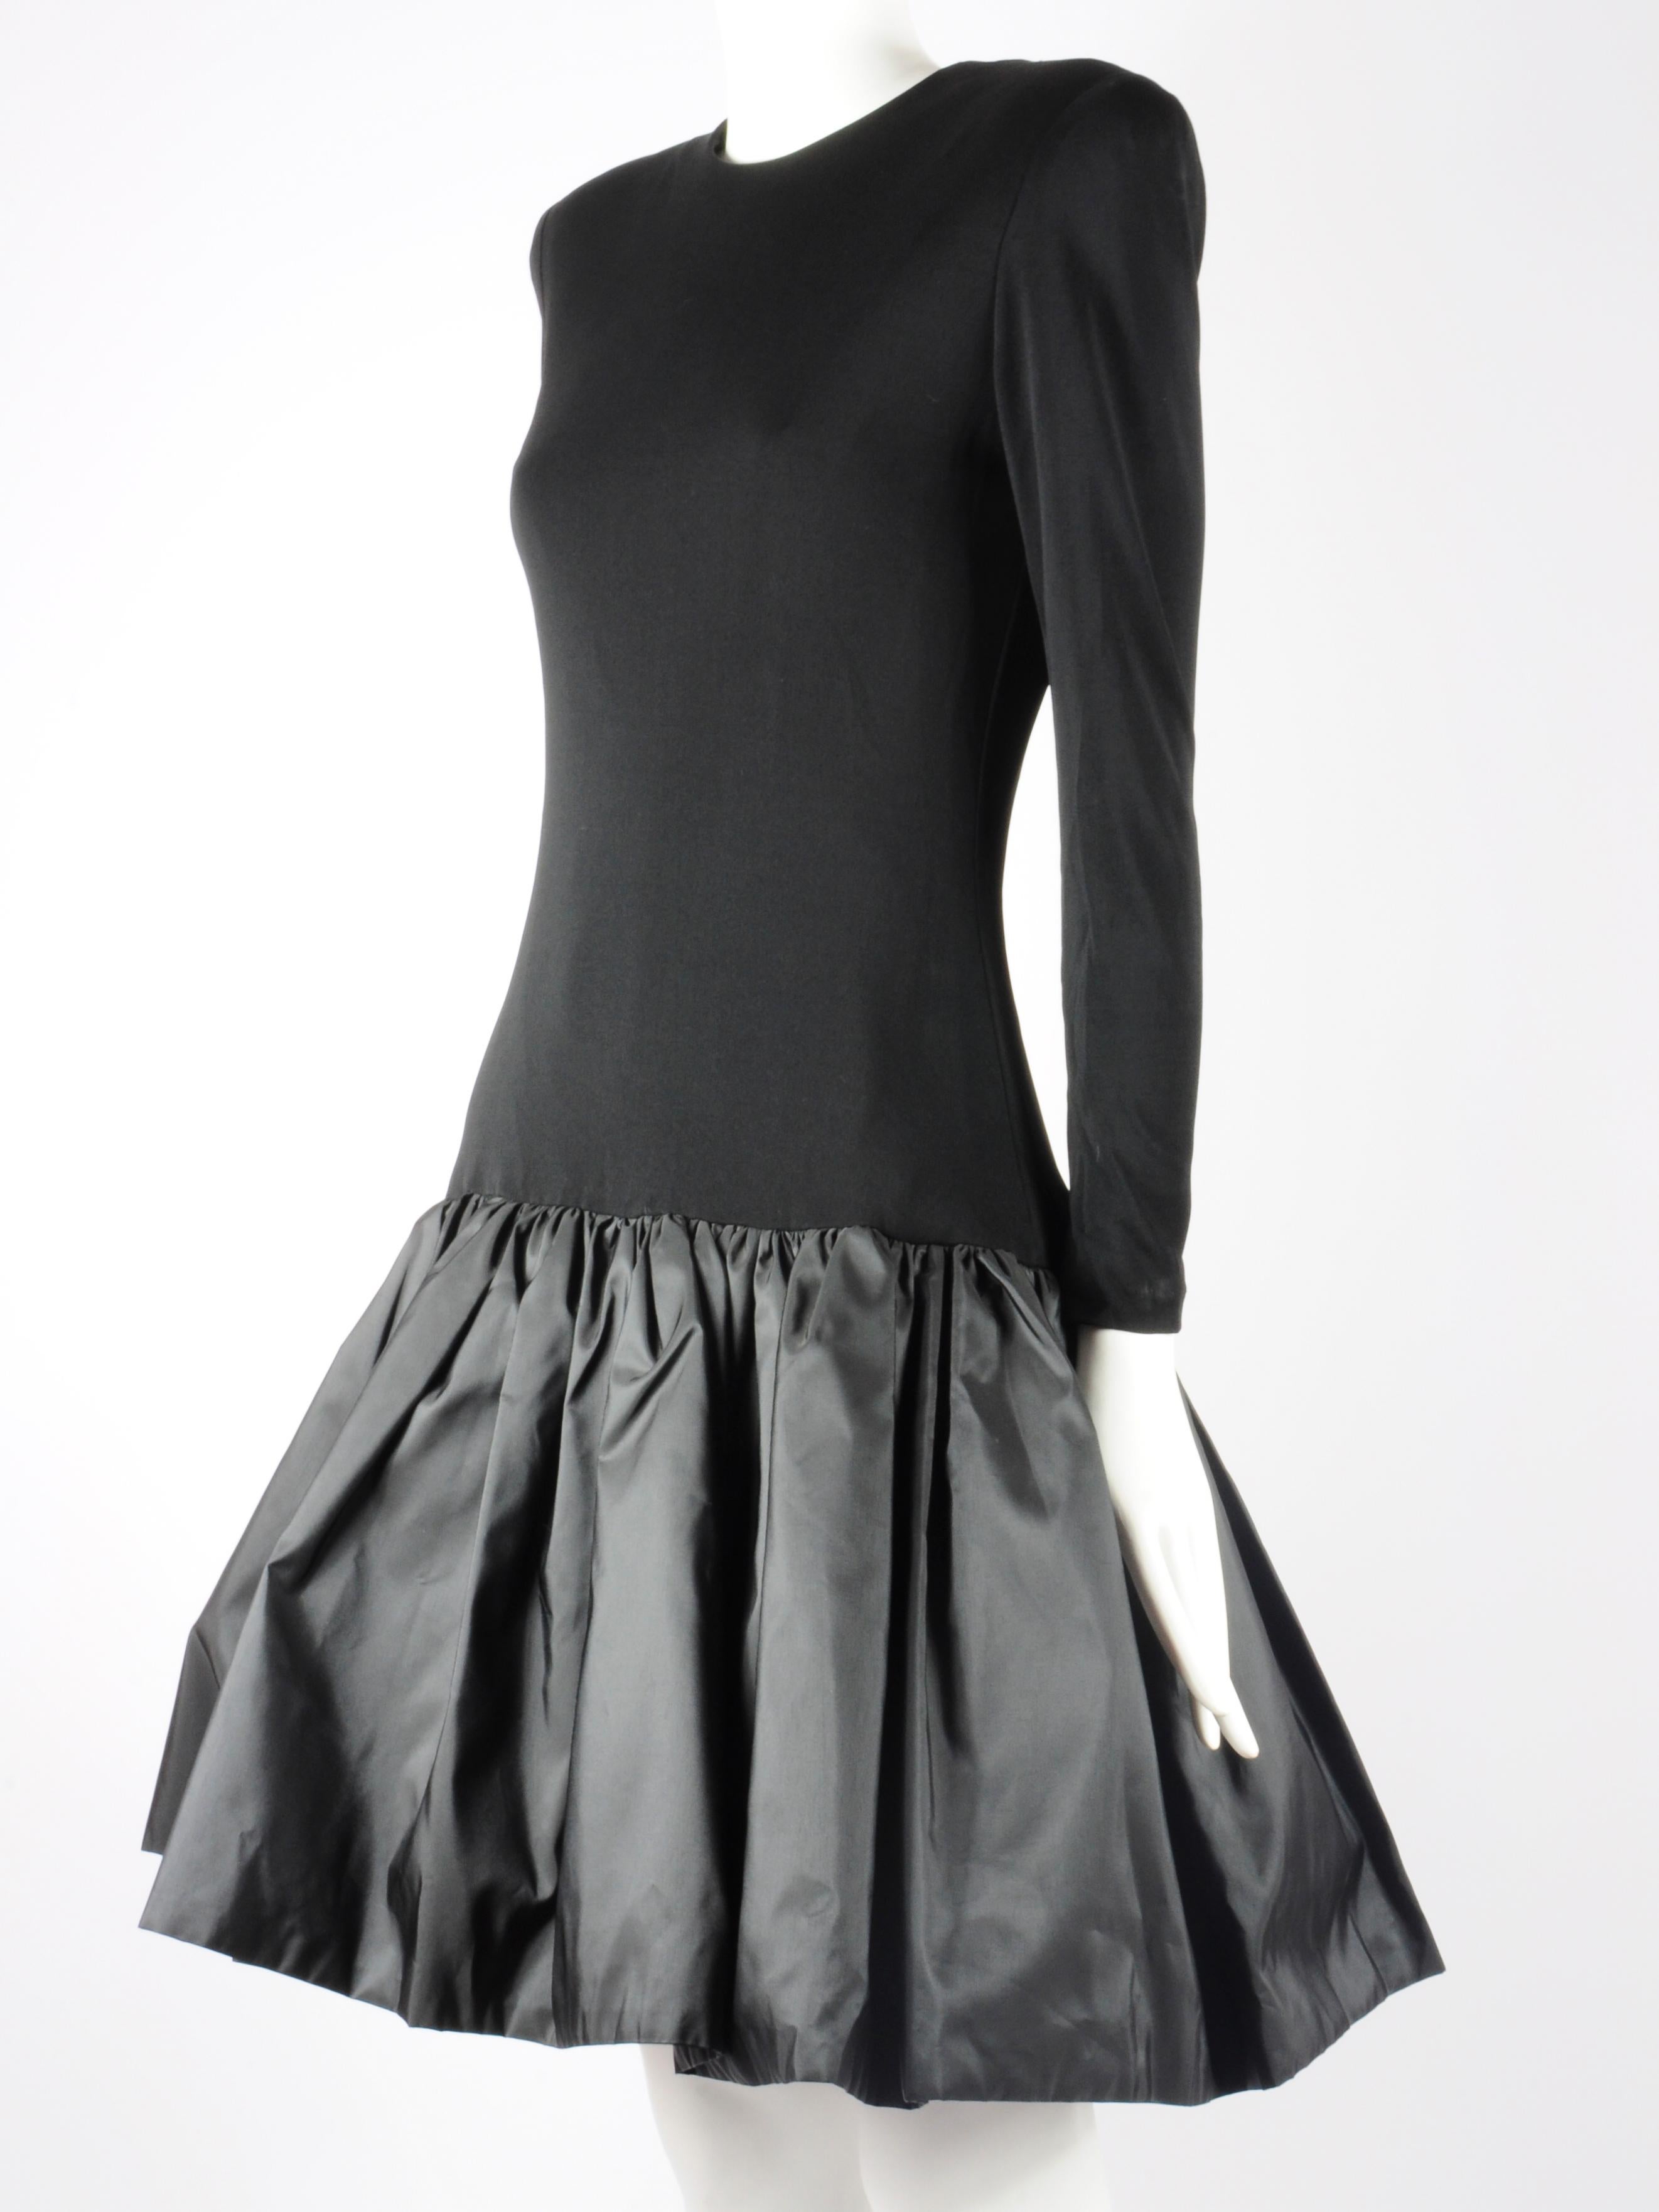 Victor Costa for Bergdorf Goodman Open Back Cocktail Dress with Tule Skirt 1980s For Sale 2